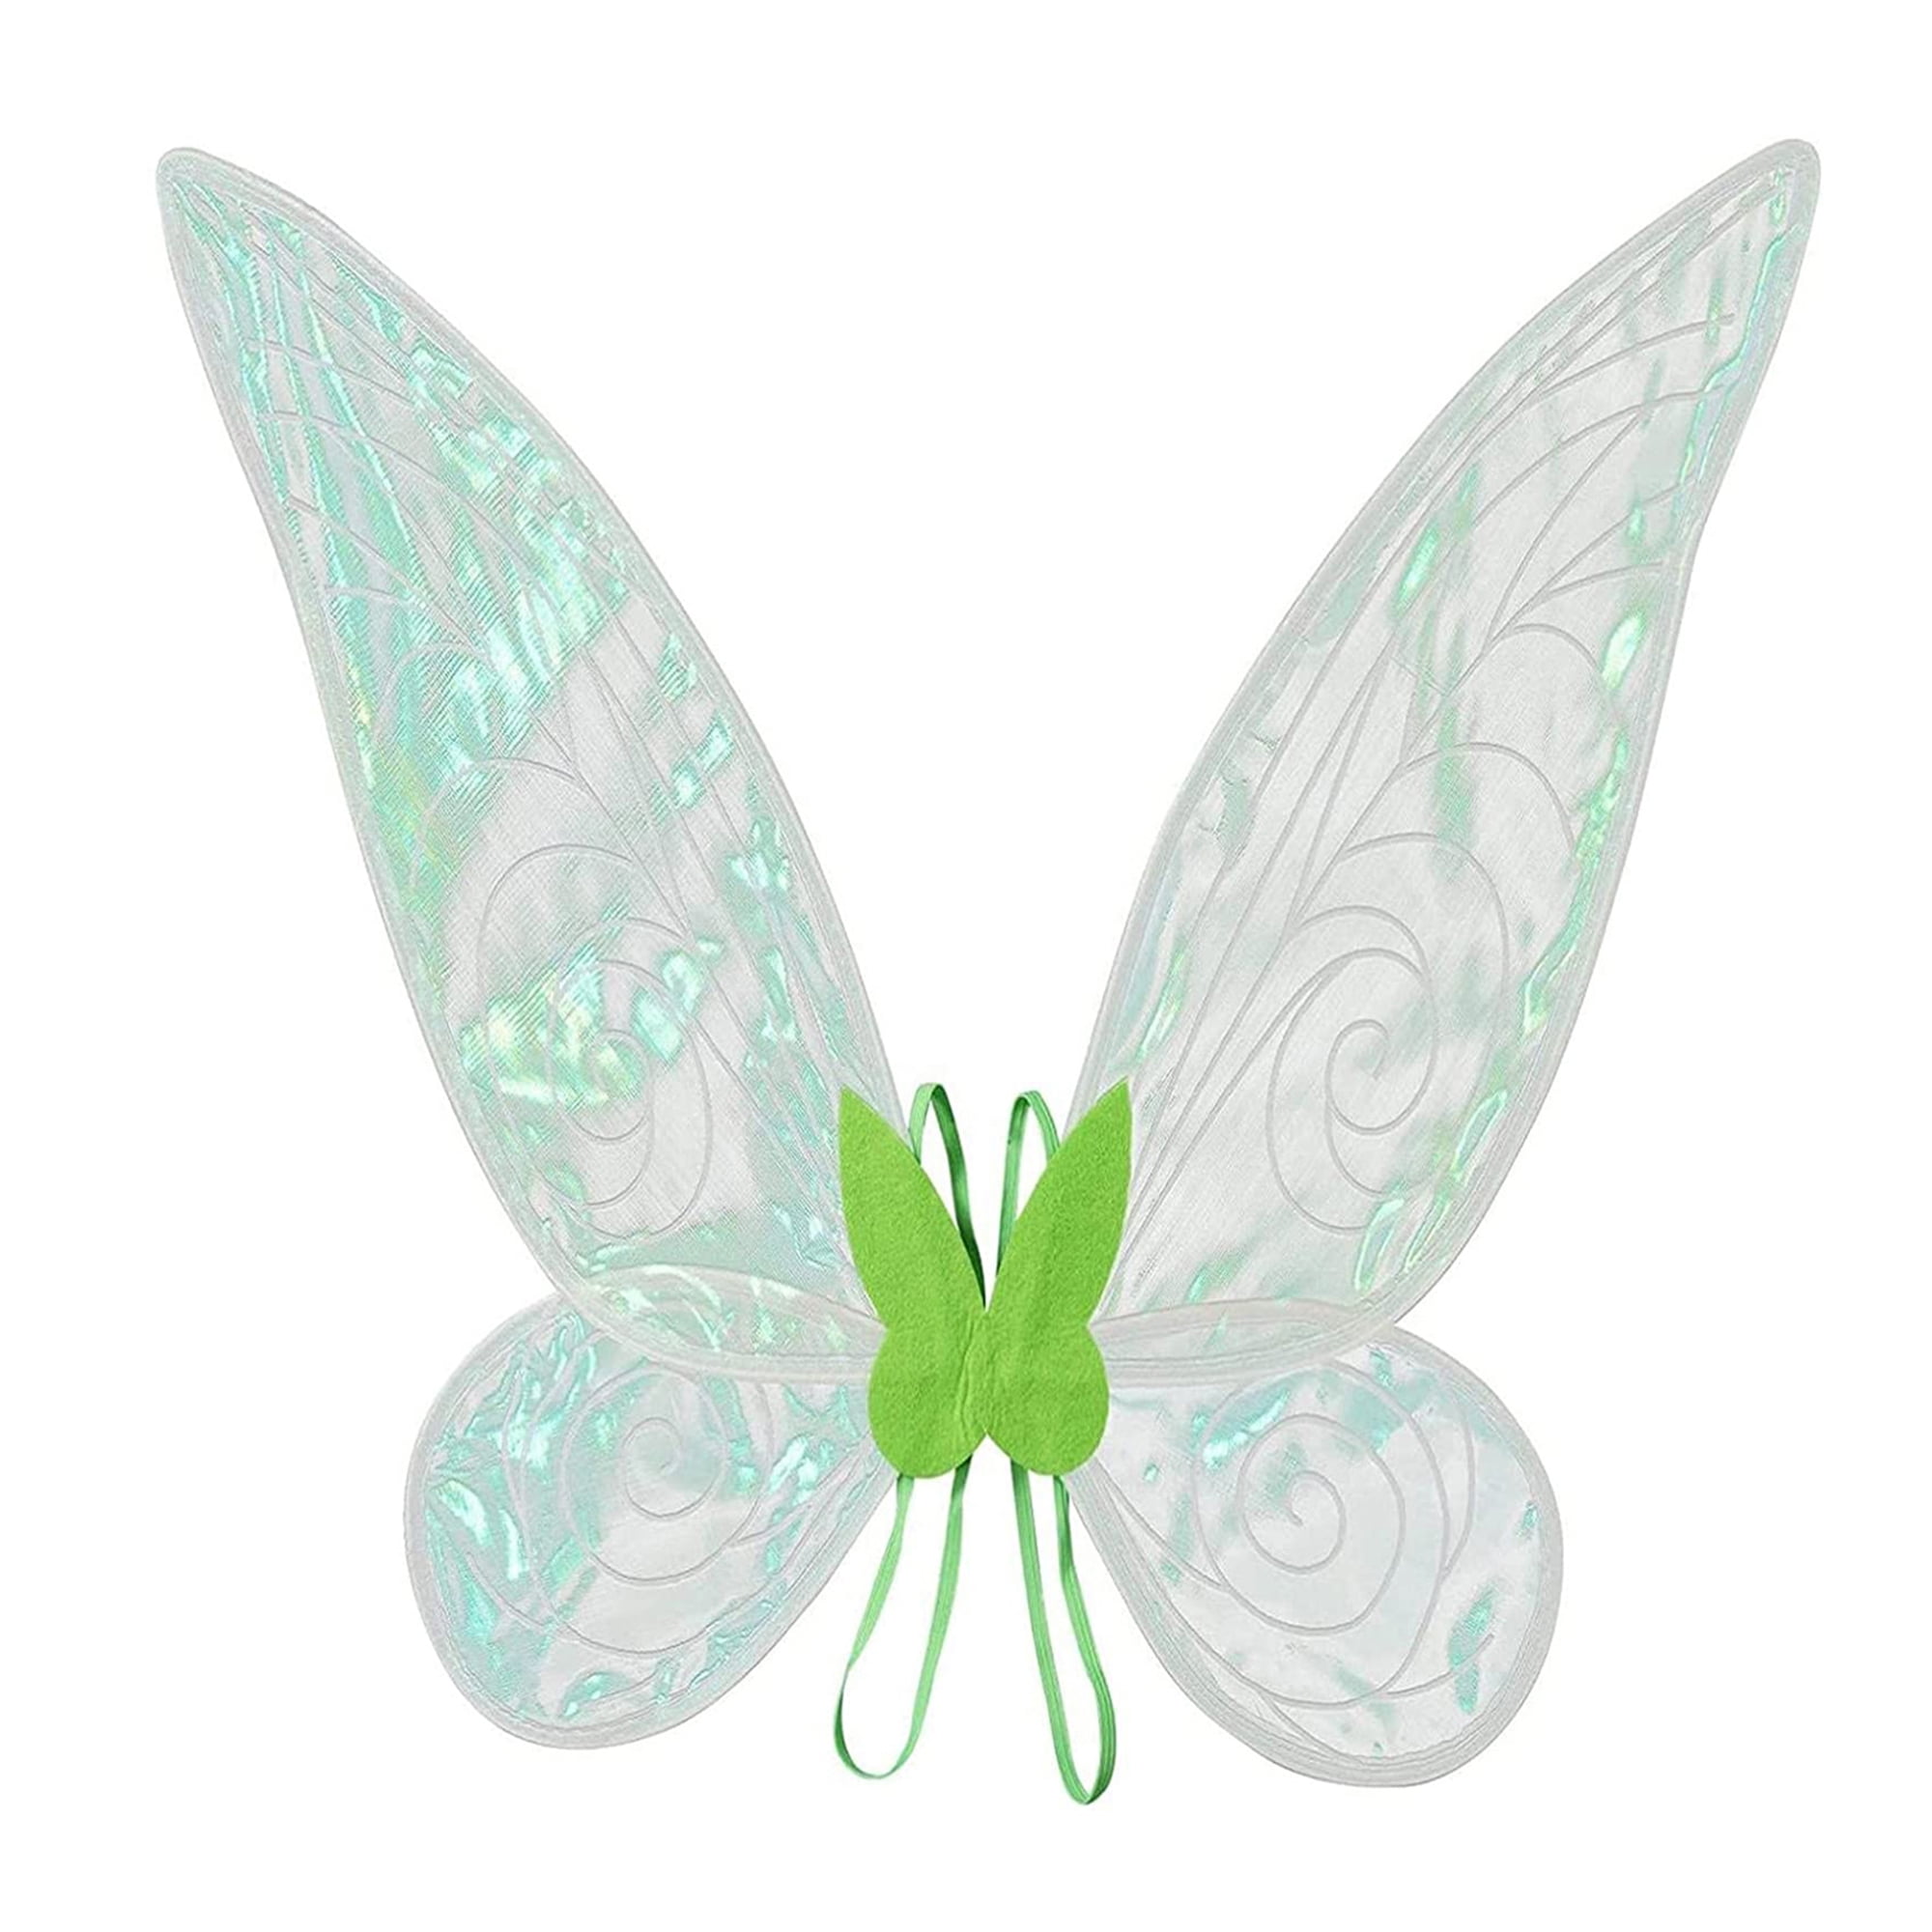 5 pcs 22"x15" Fairy Wings Butterfly TinkerBell Pixie Dress Up Costume 